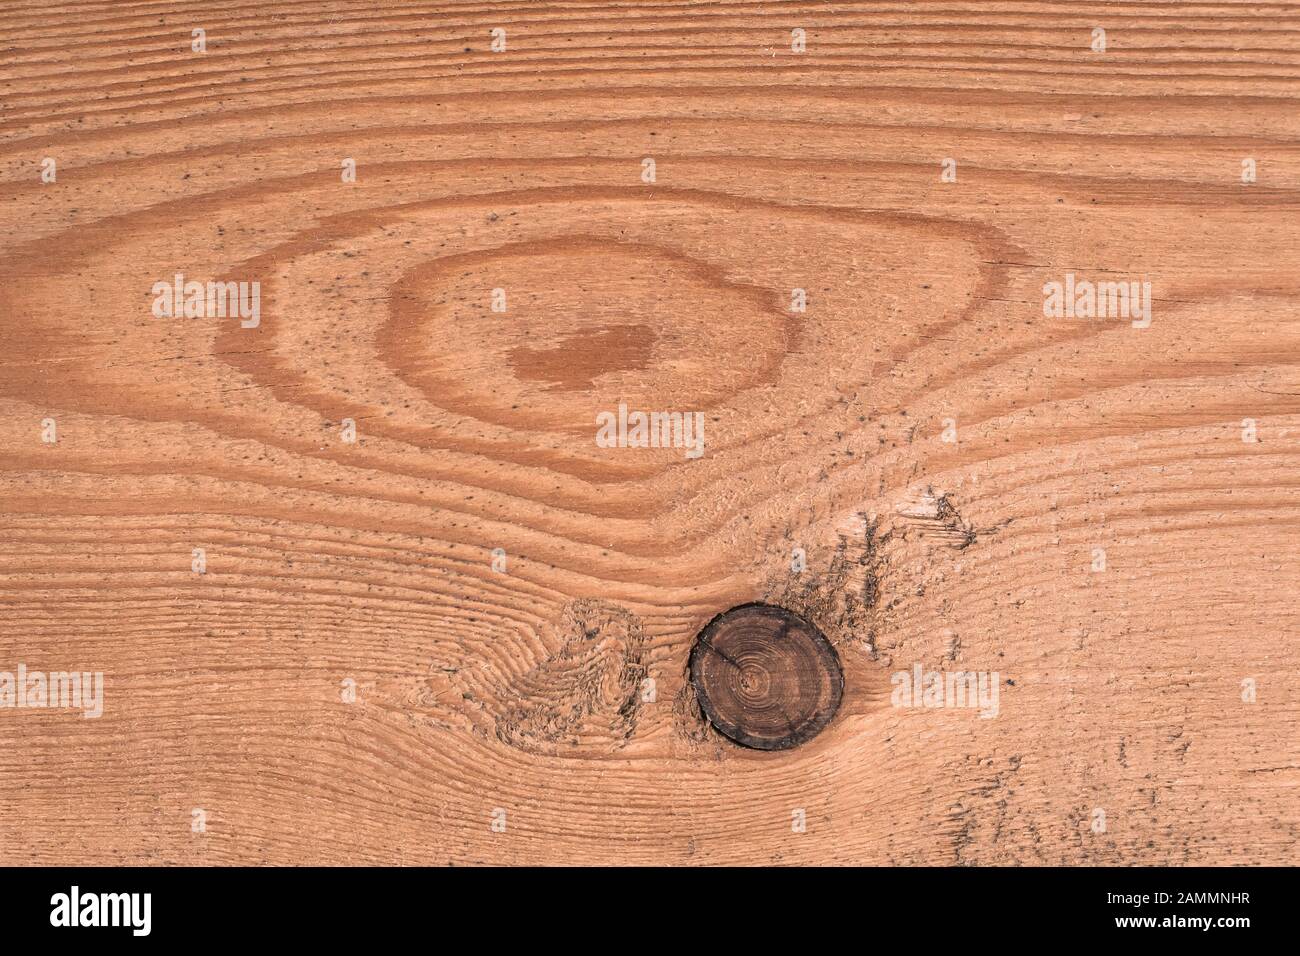 Tree knot on the wooden board. Rustic timber, natural pattern. Hardwood surface, rough wood panel Stock Photo